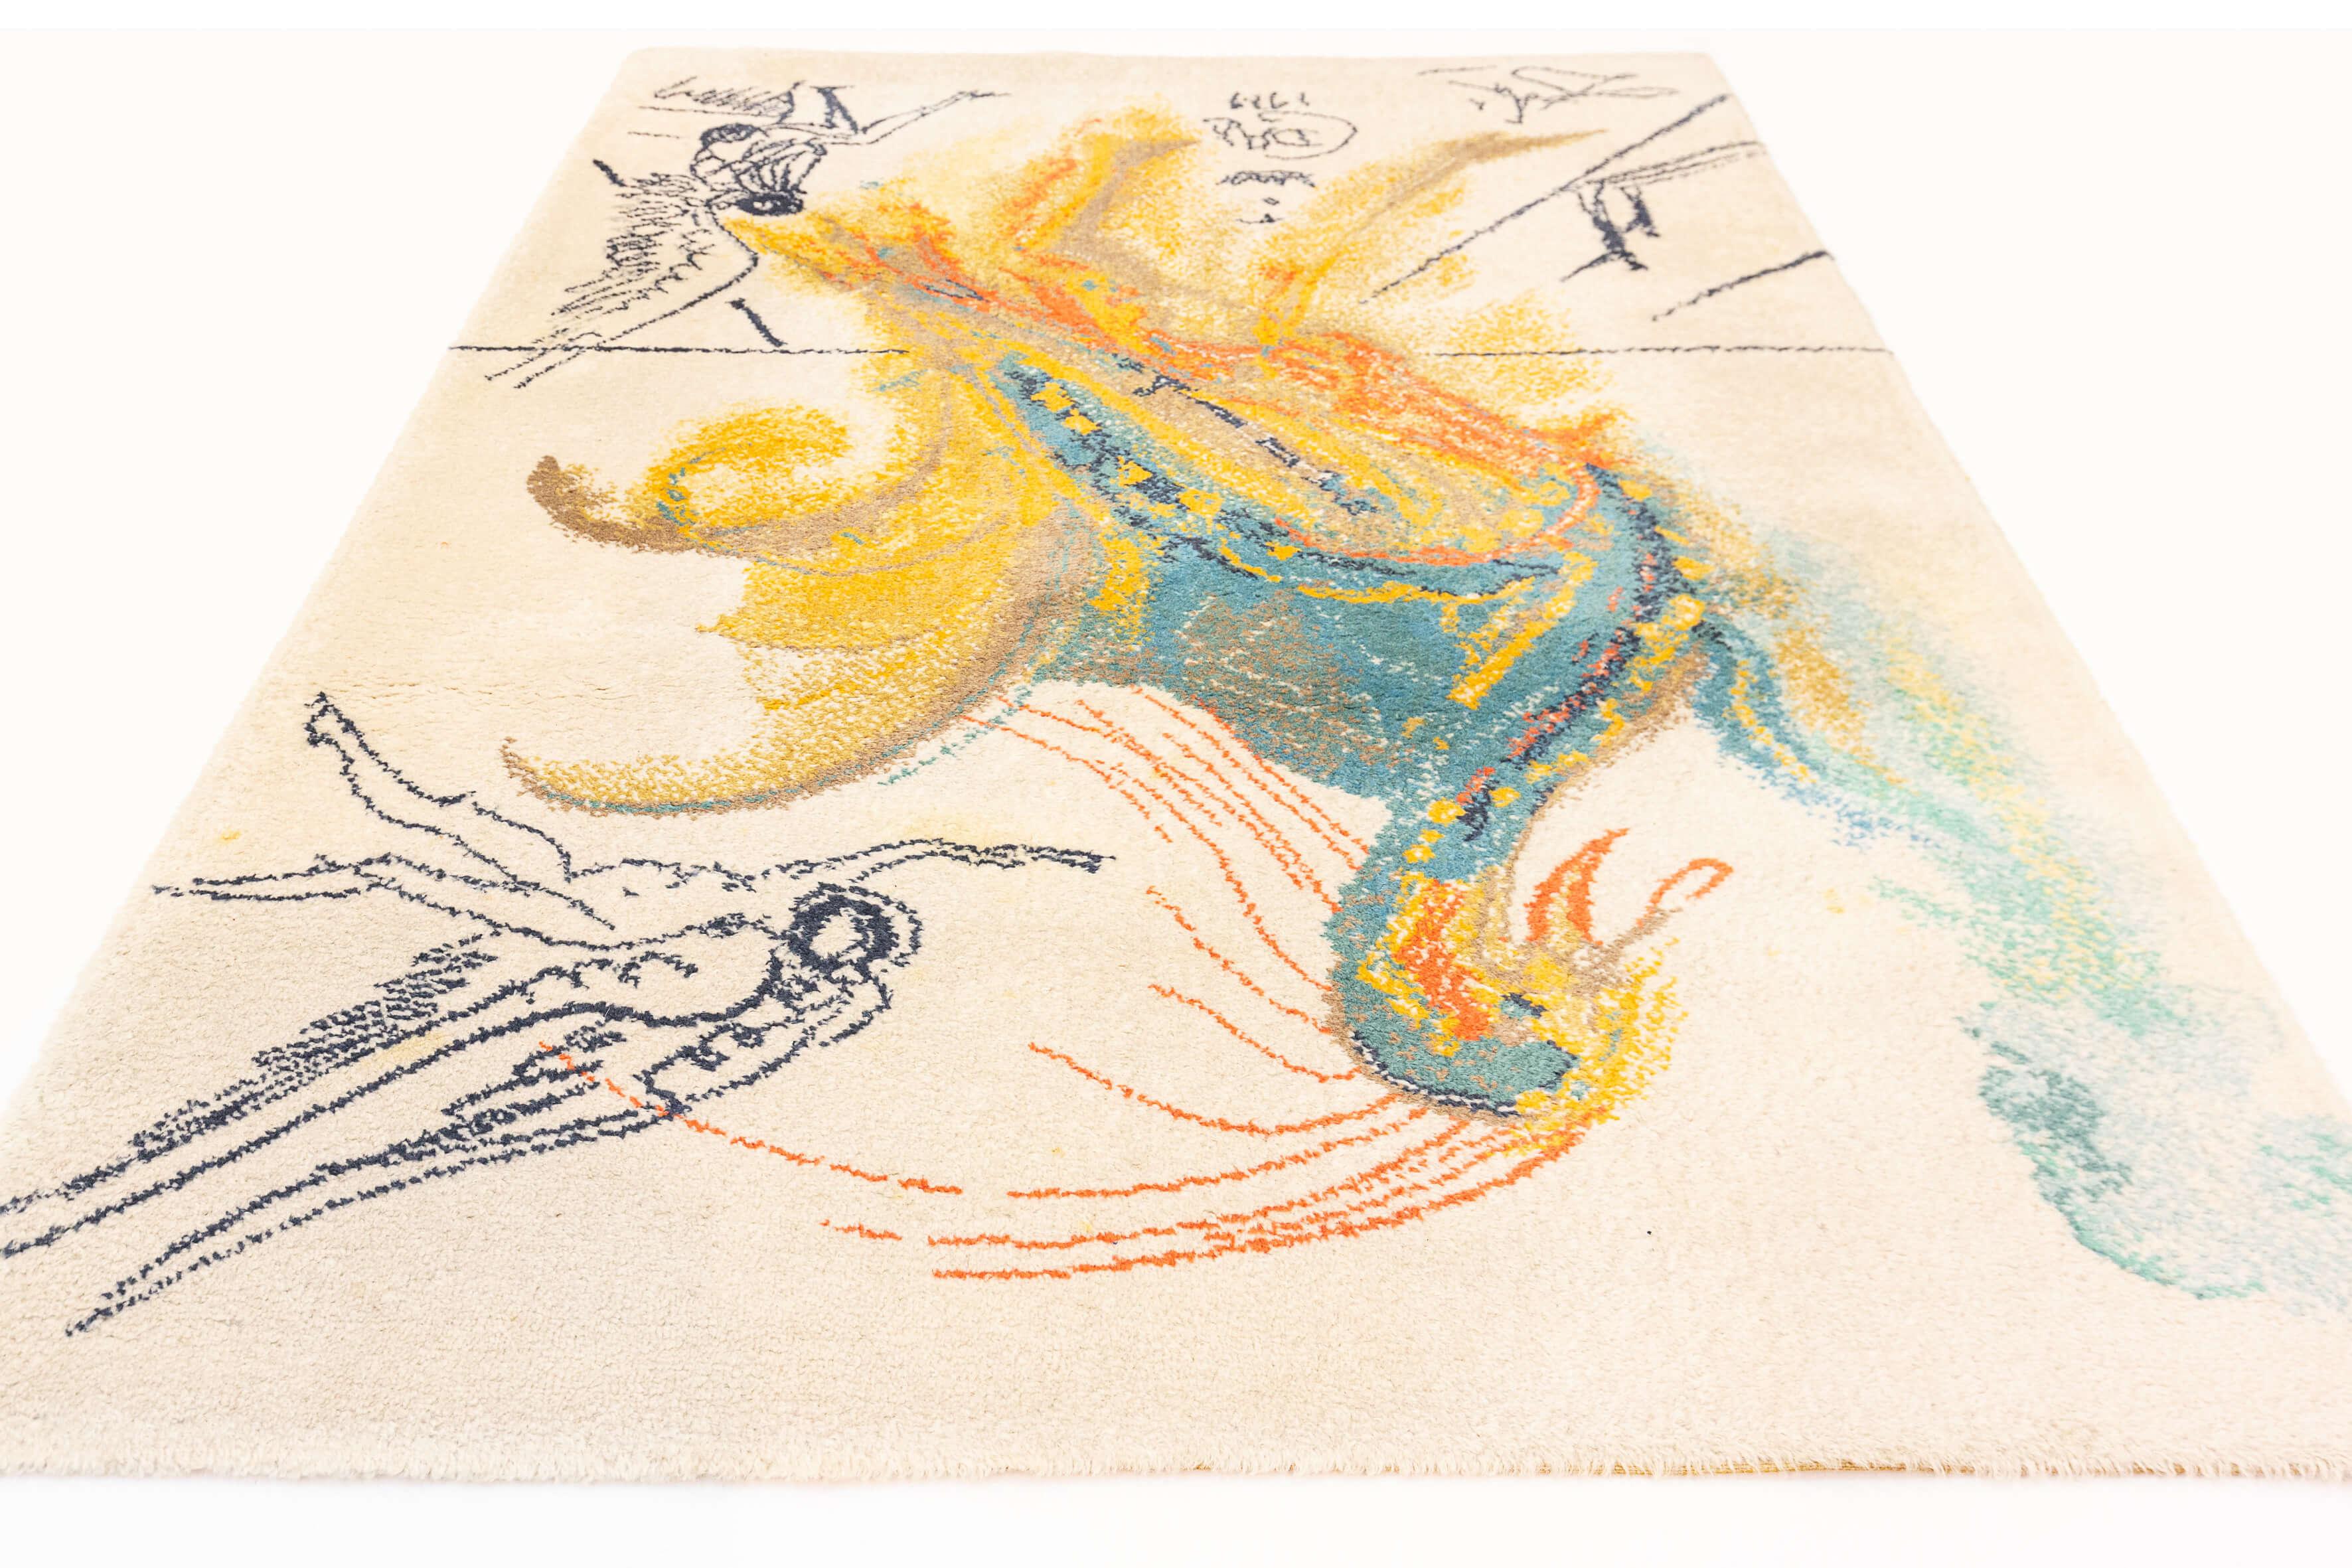 This is a mid-century rug featuring artwork by Salvador Dalí, the renowned Spanish surrealist artist. The piece is a representation of Dalí's unique and fantastical style, depicting an abstracted, colorful phoenix-like creature in the midst of a